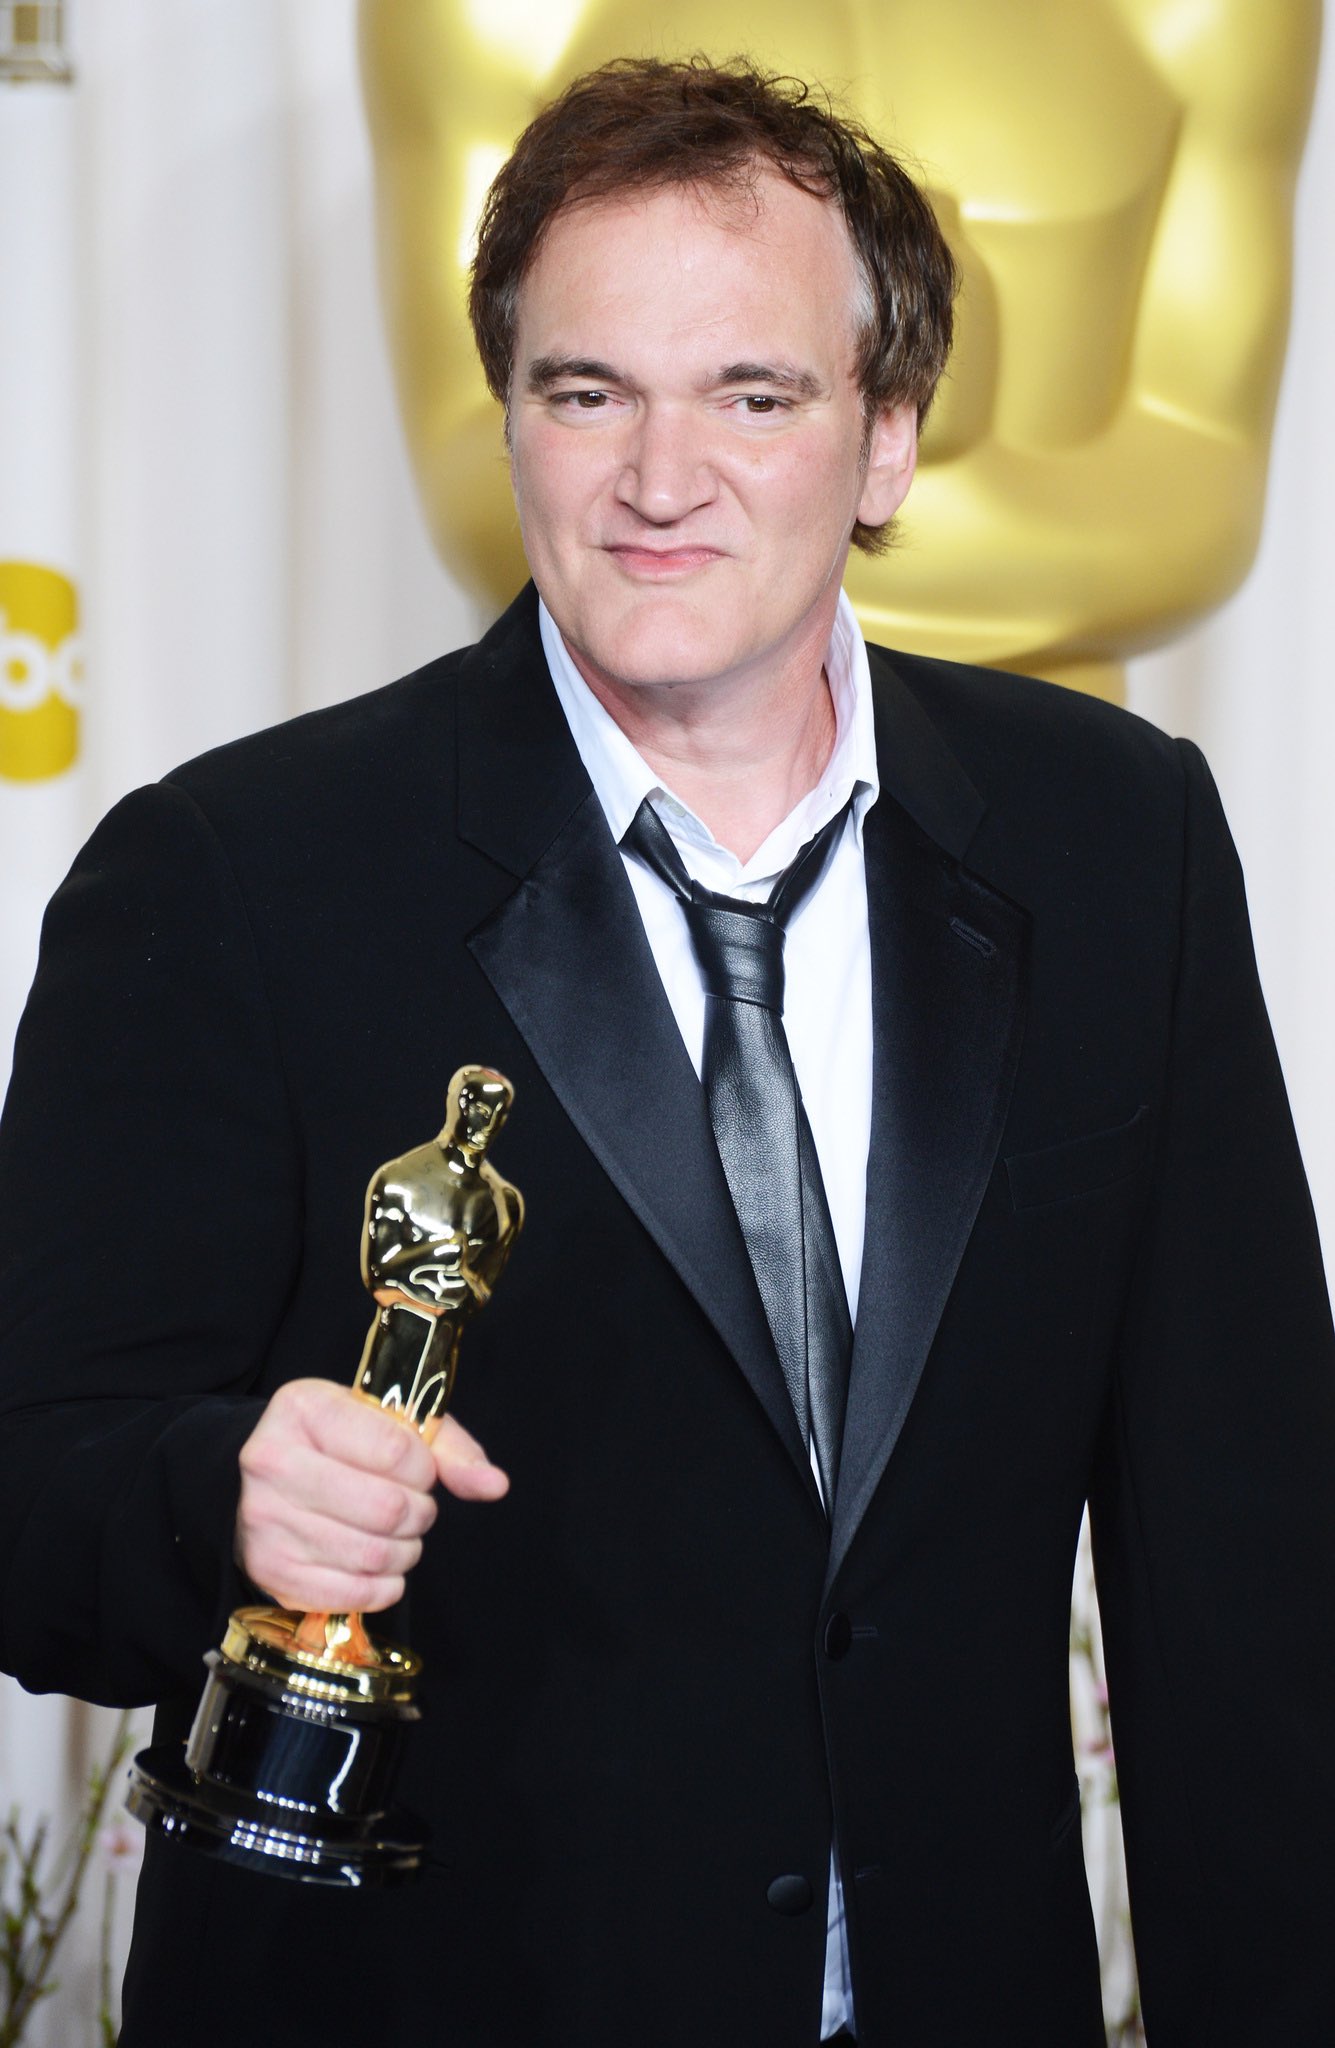 Happy birthday to Quentin Tarantino! What are some of your fave films by him? 